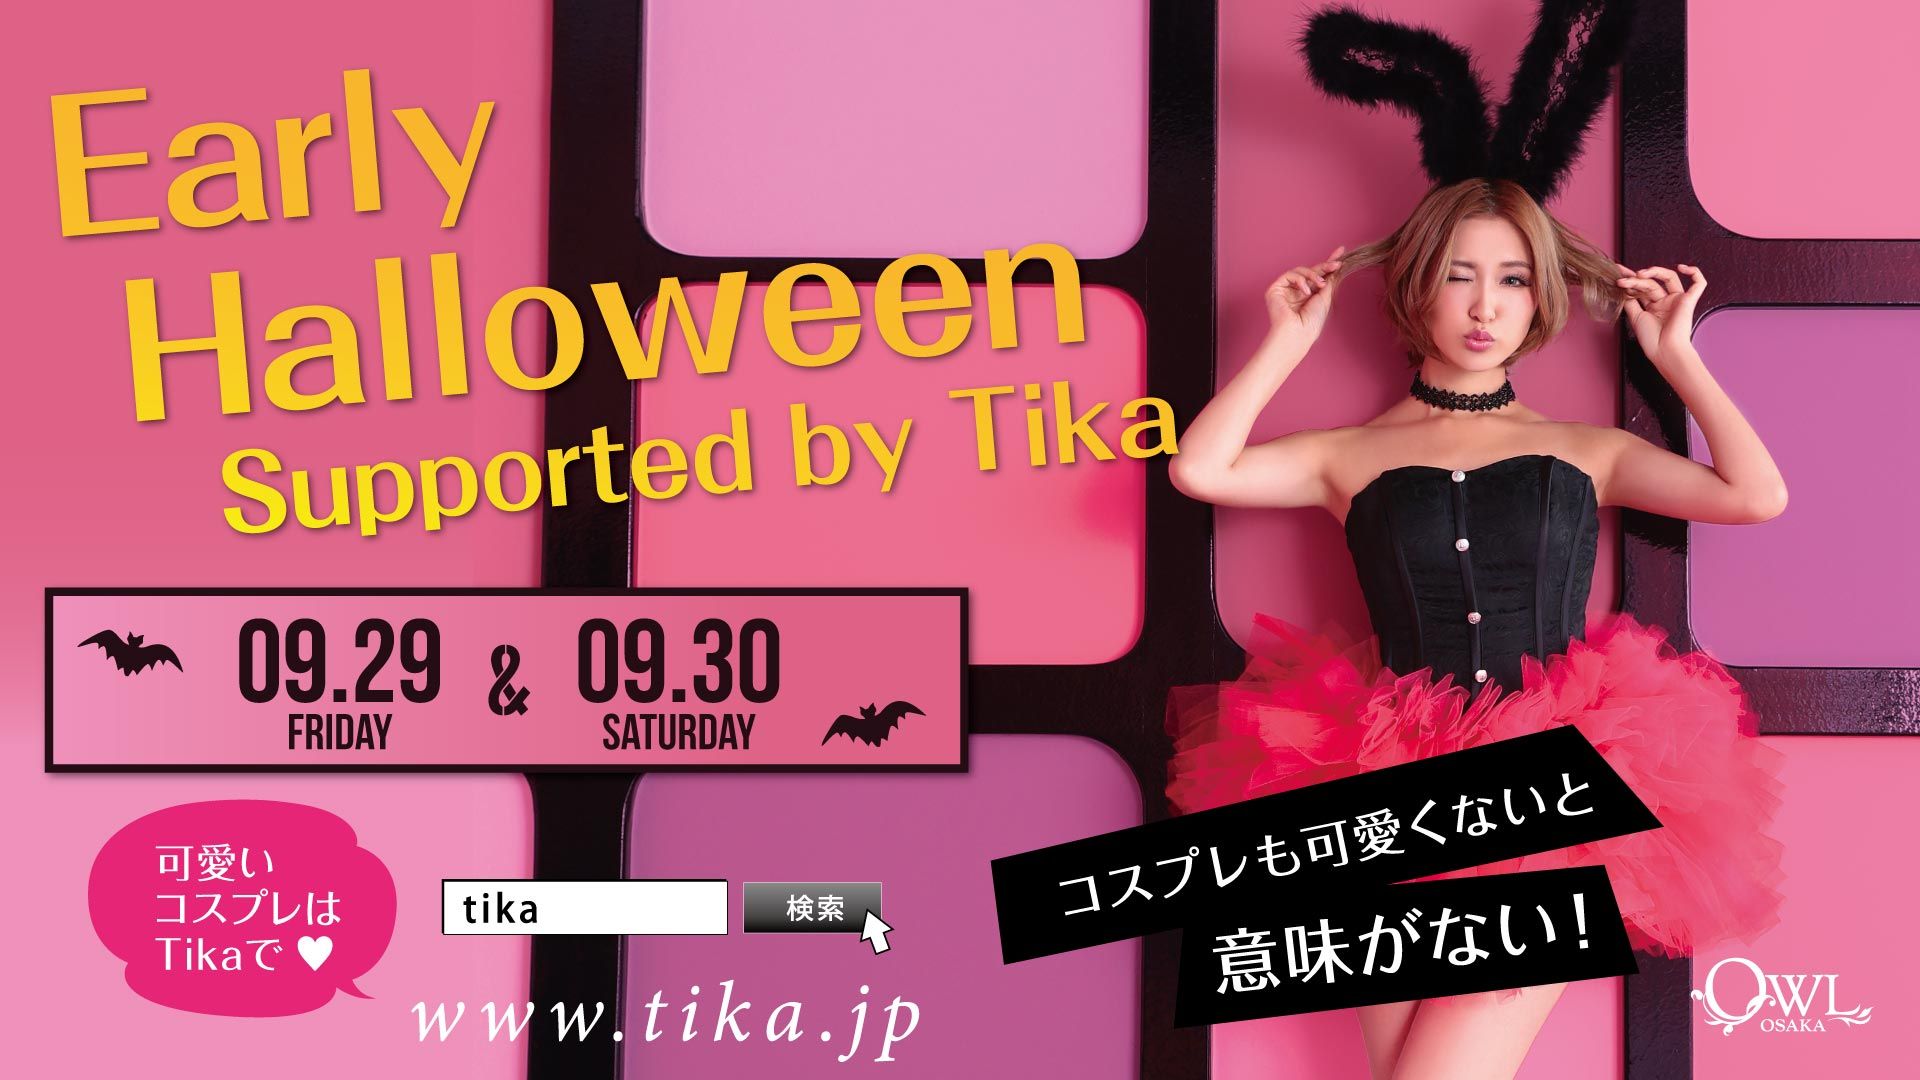 Early Halloween Supported by Tika / 【 OSAKA Celeb Night / TOP NATION 】